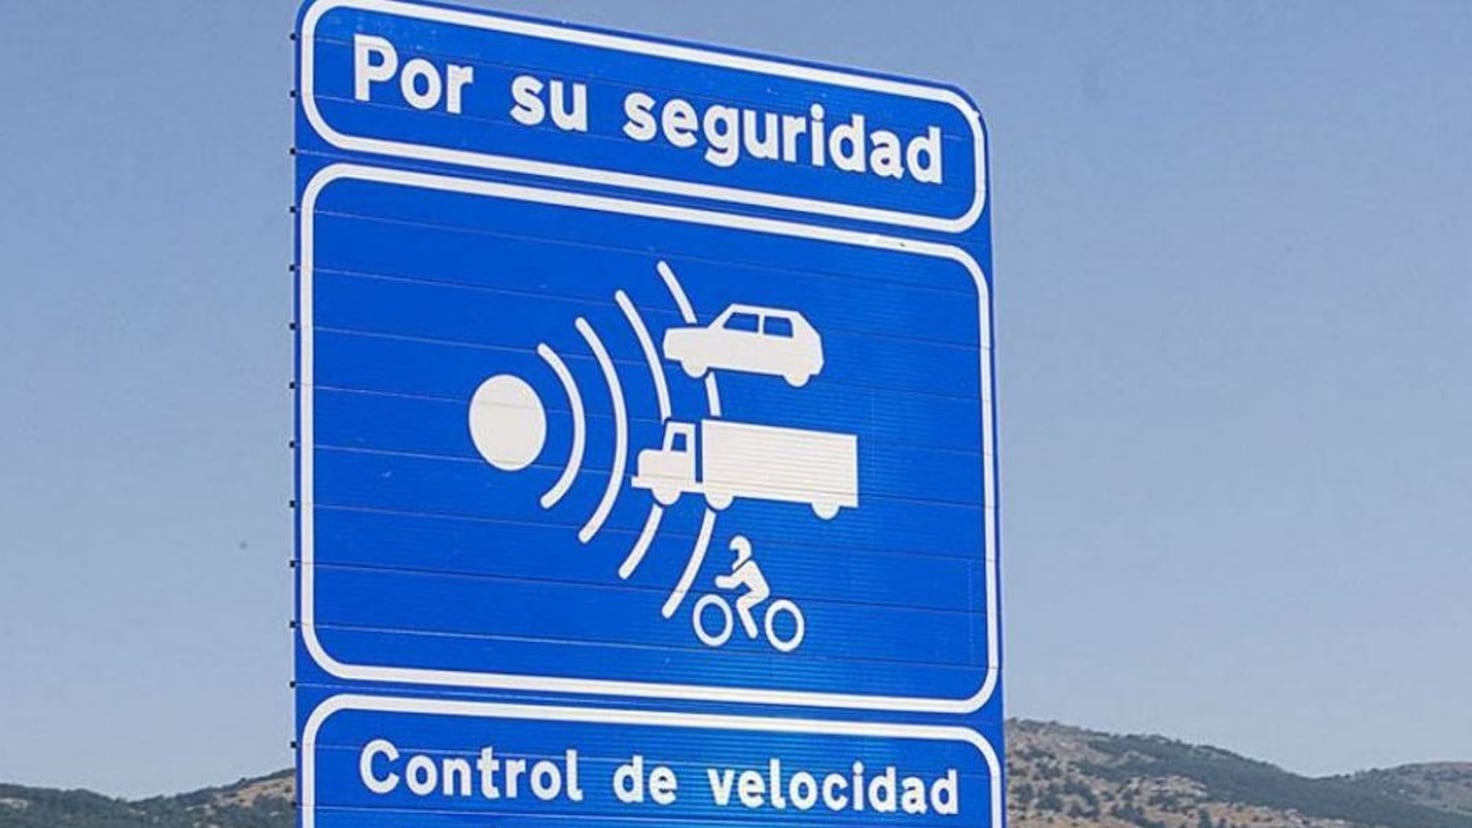 Are you going on holiday? These are the places where the DGT places fixed and mobile radars in Spain
